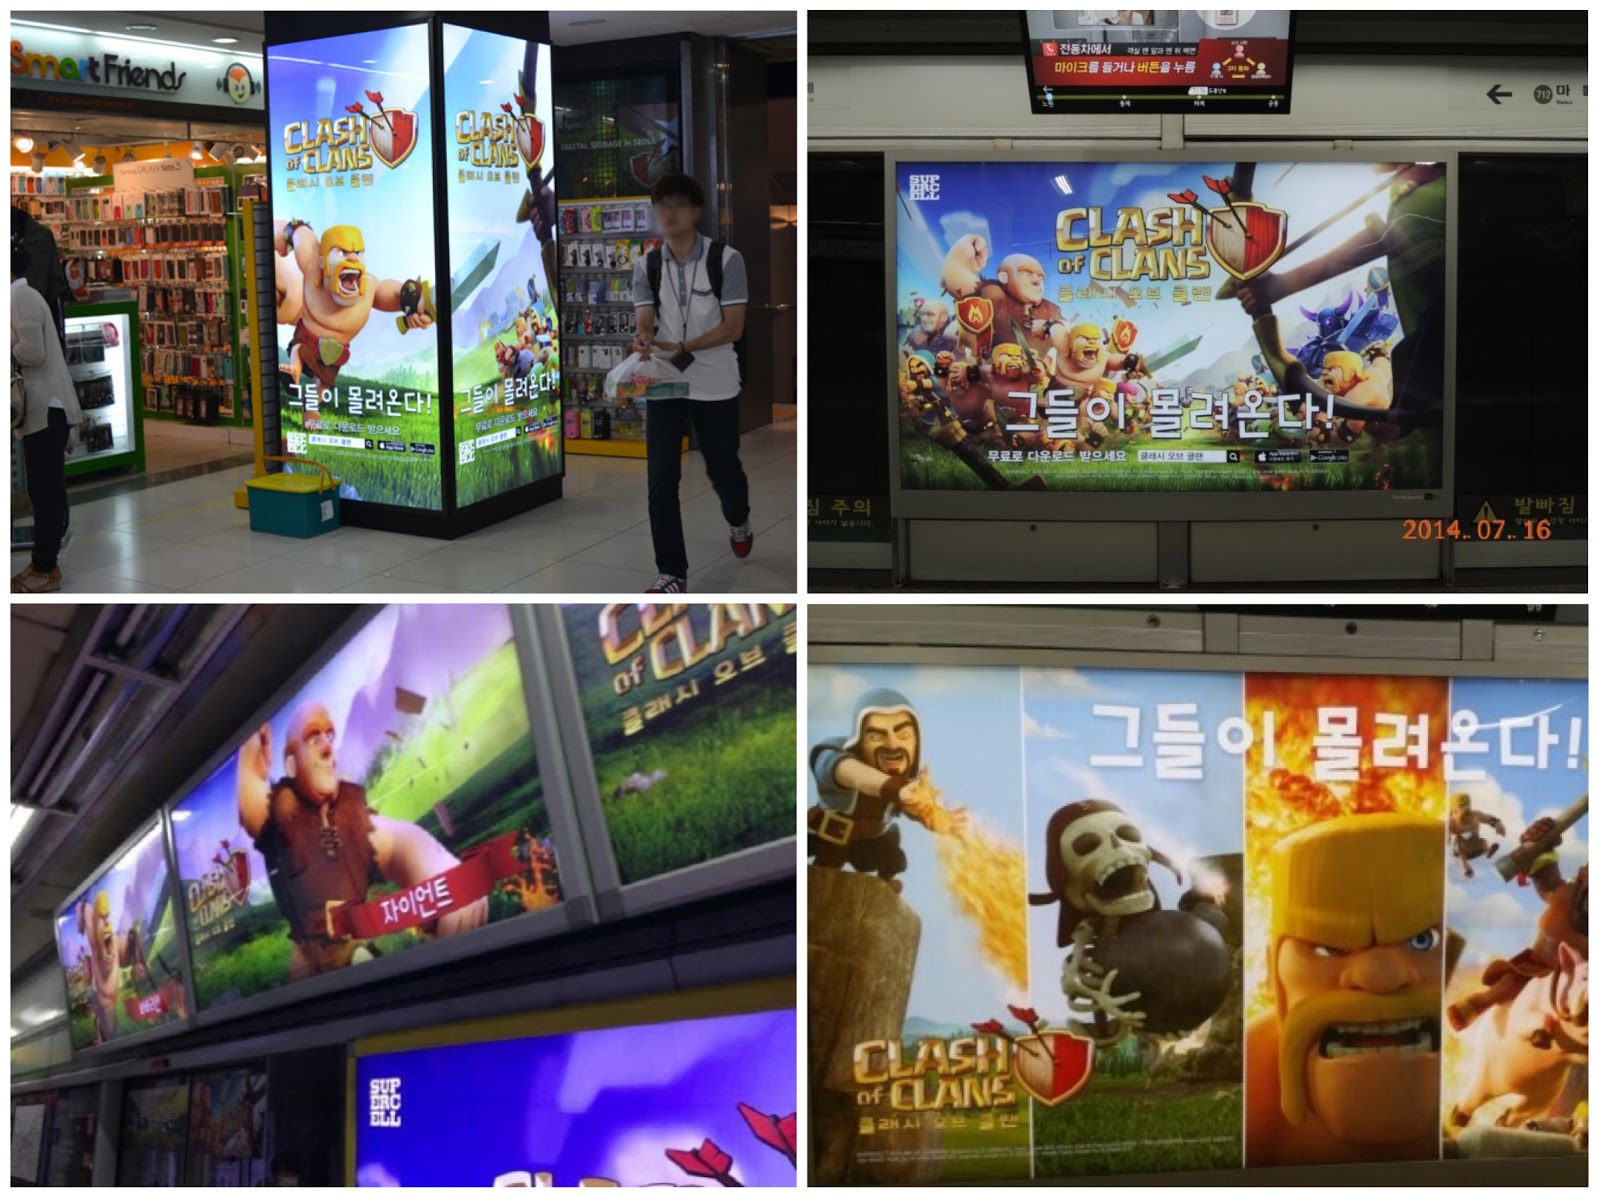 Clash of Clans Outdoor Commercials Image